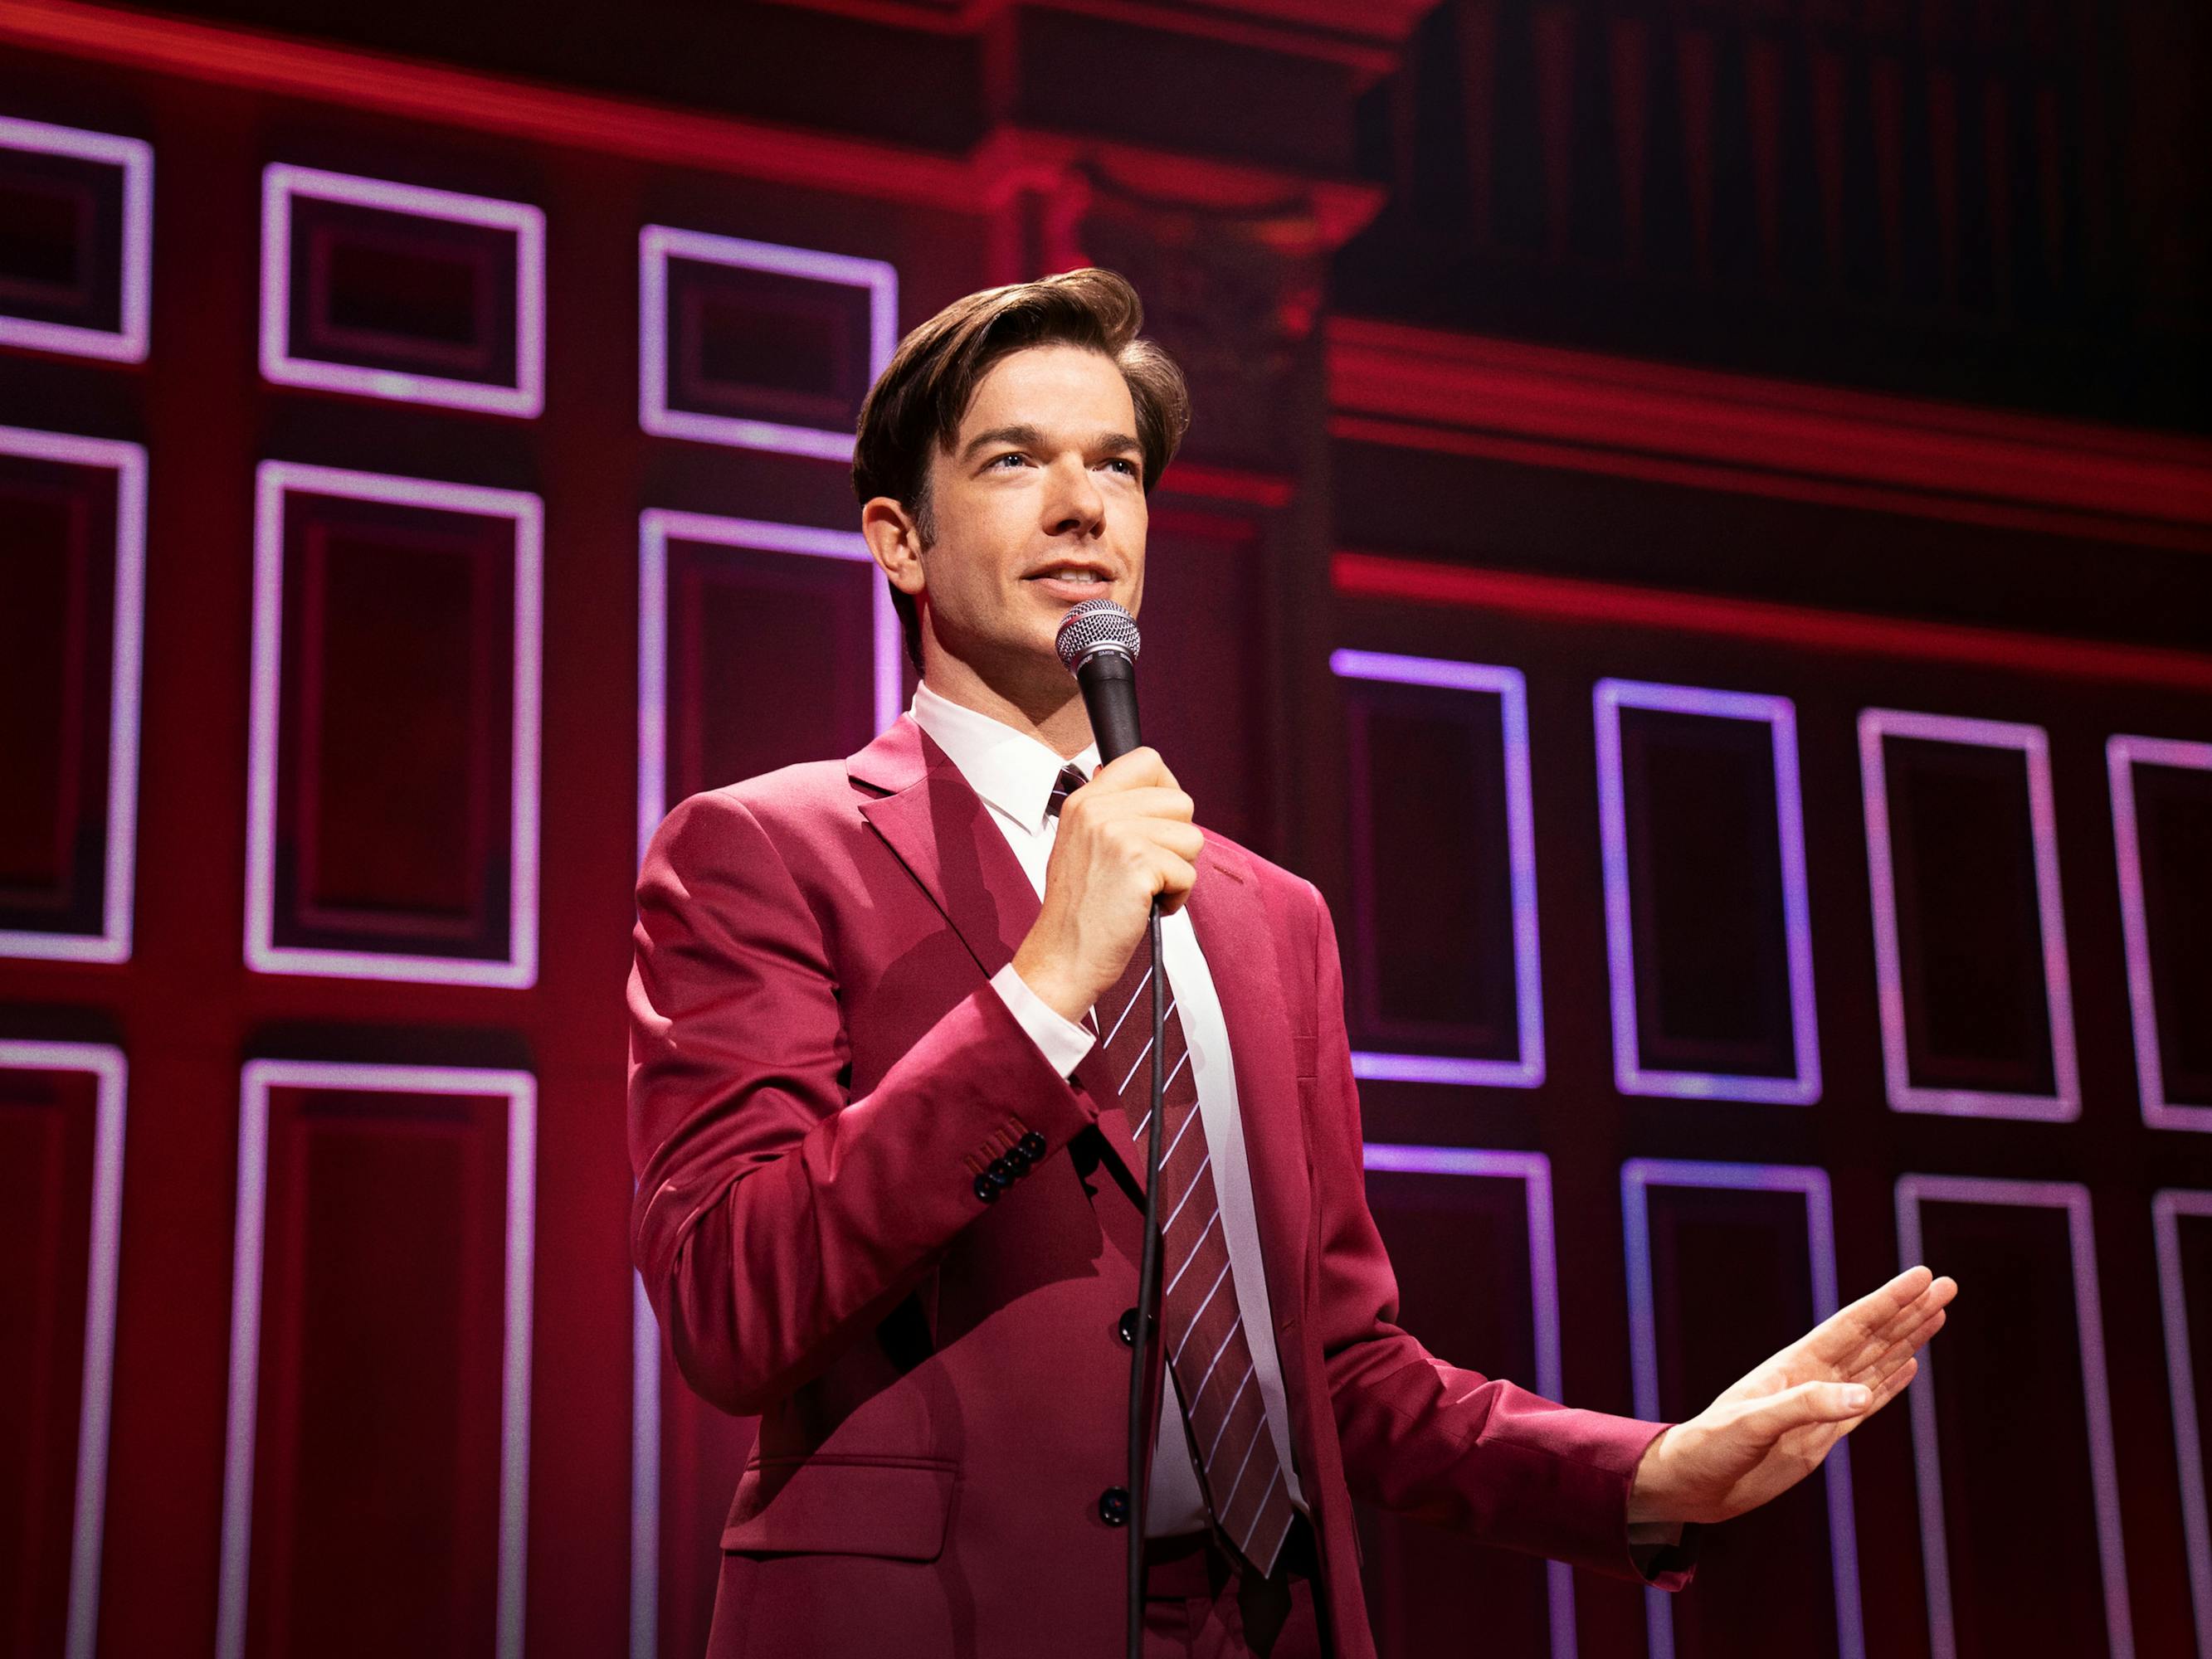 John Mulaney wears a red suit and stands on a stage.